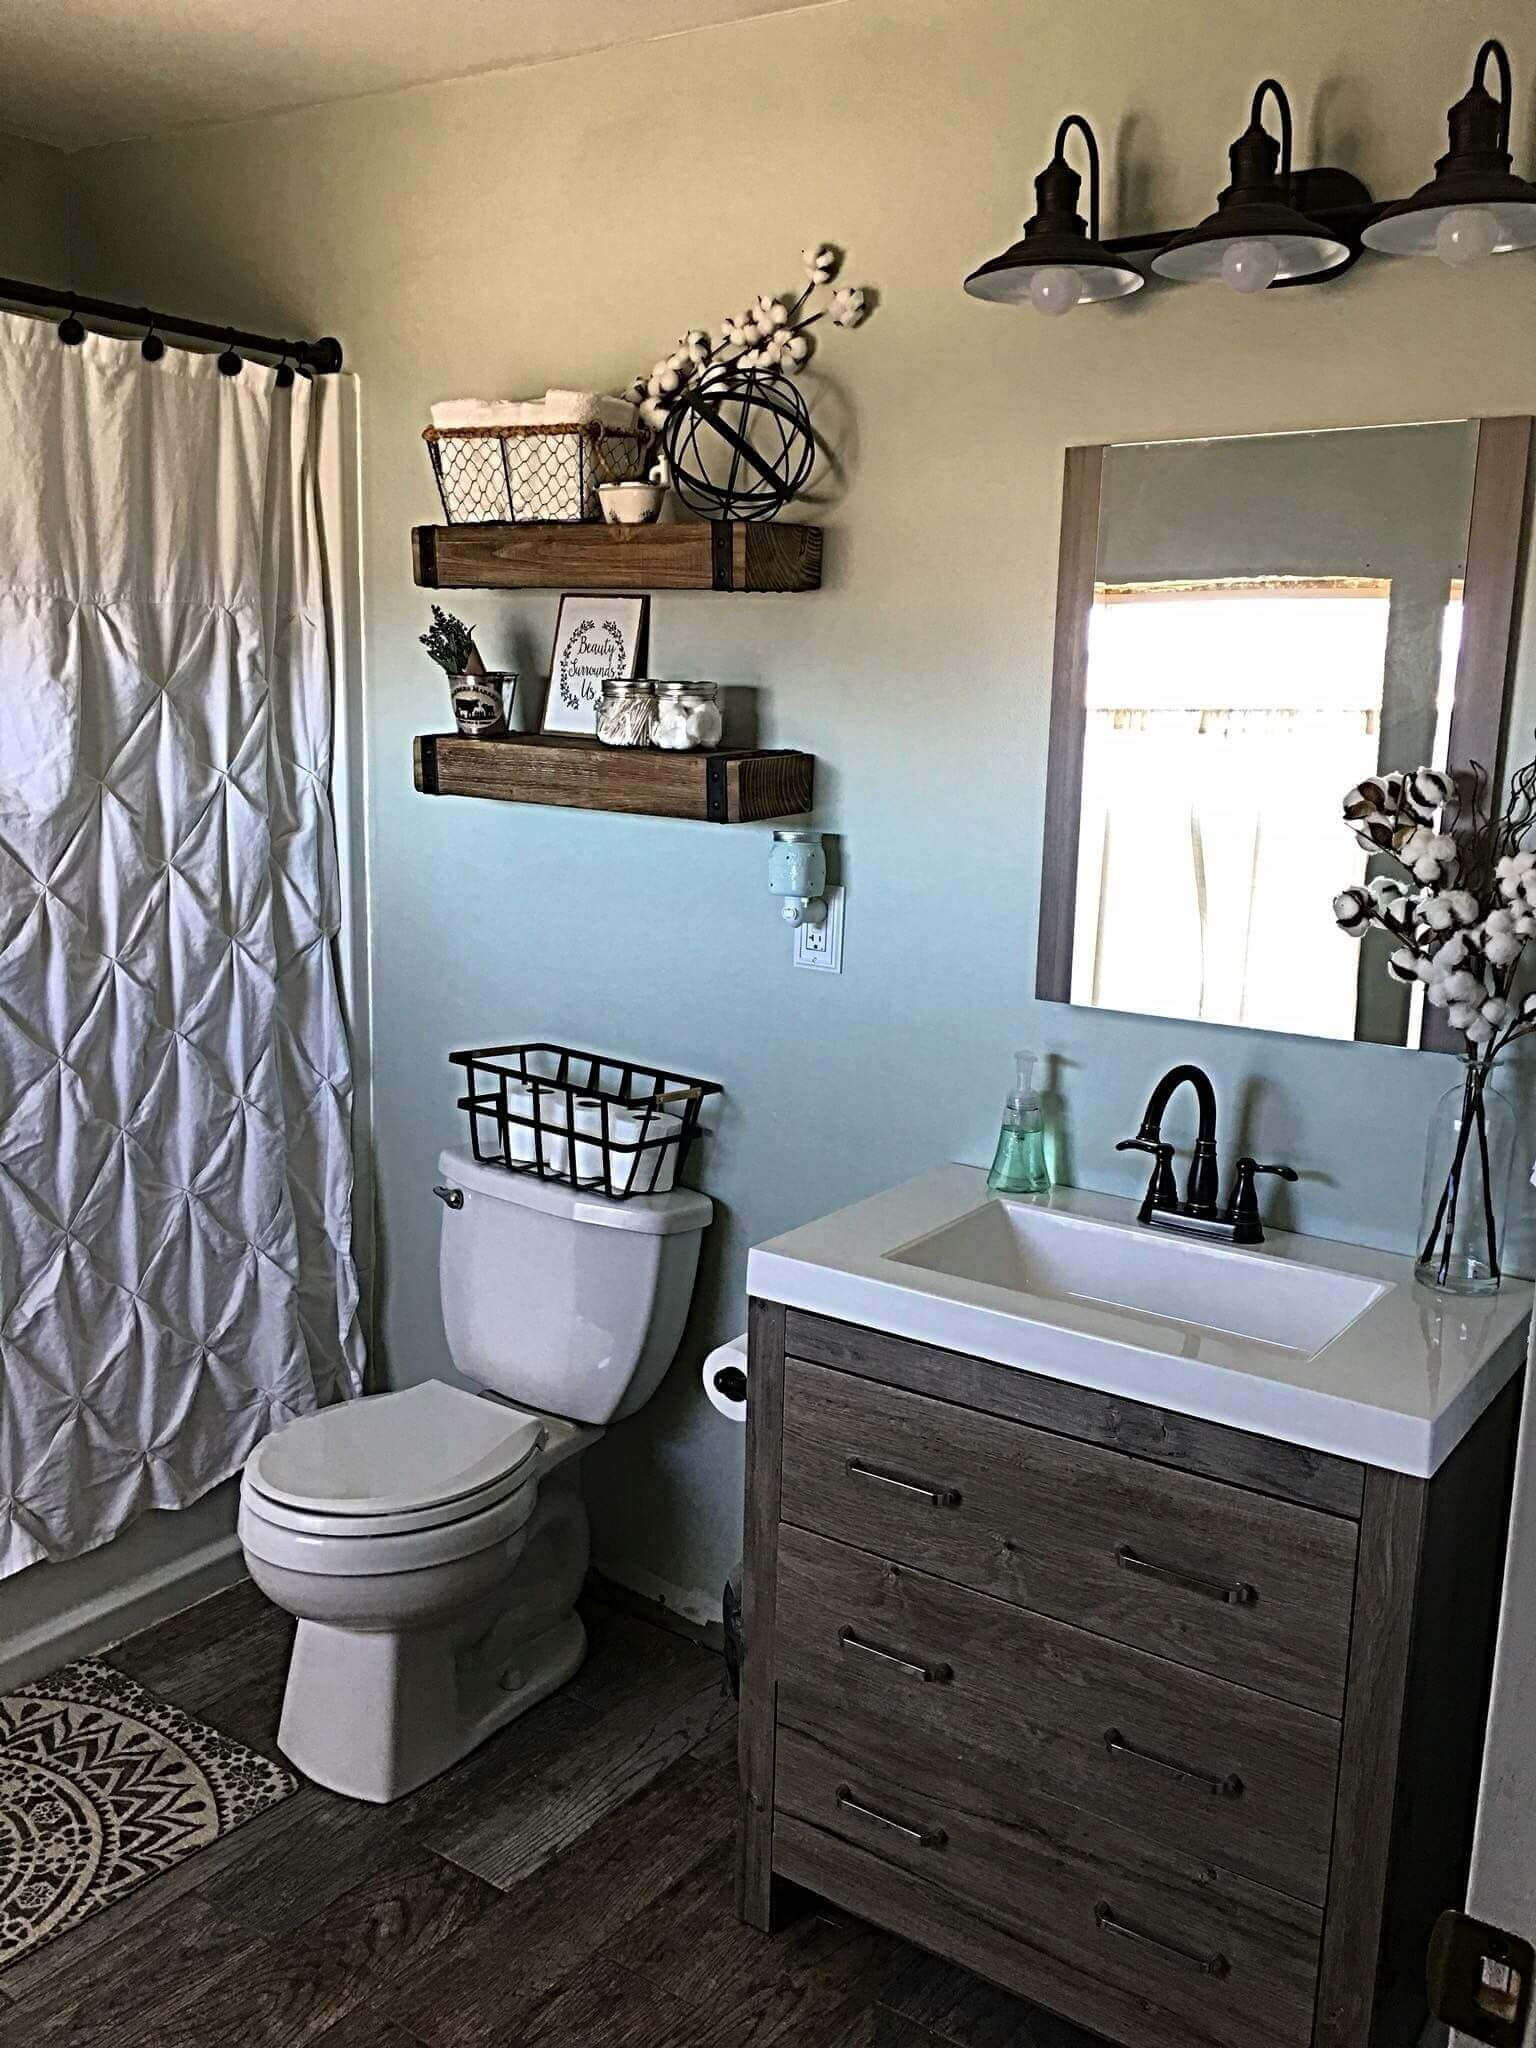 Guest Bathroom Decorations
 29 Small Guest Bathroom Ideas to ‘Wow’ Your Visitors